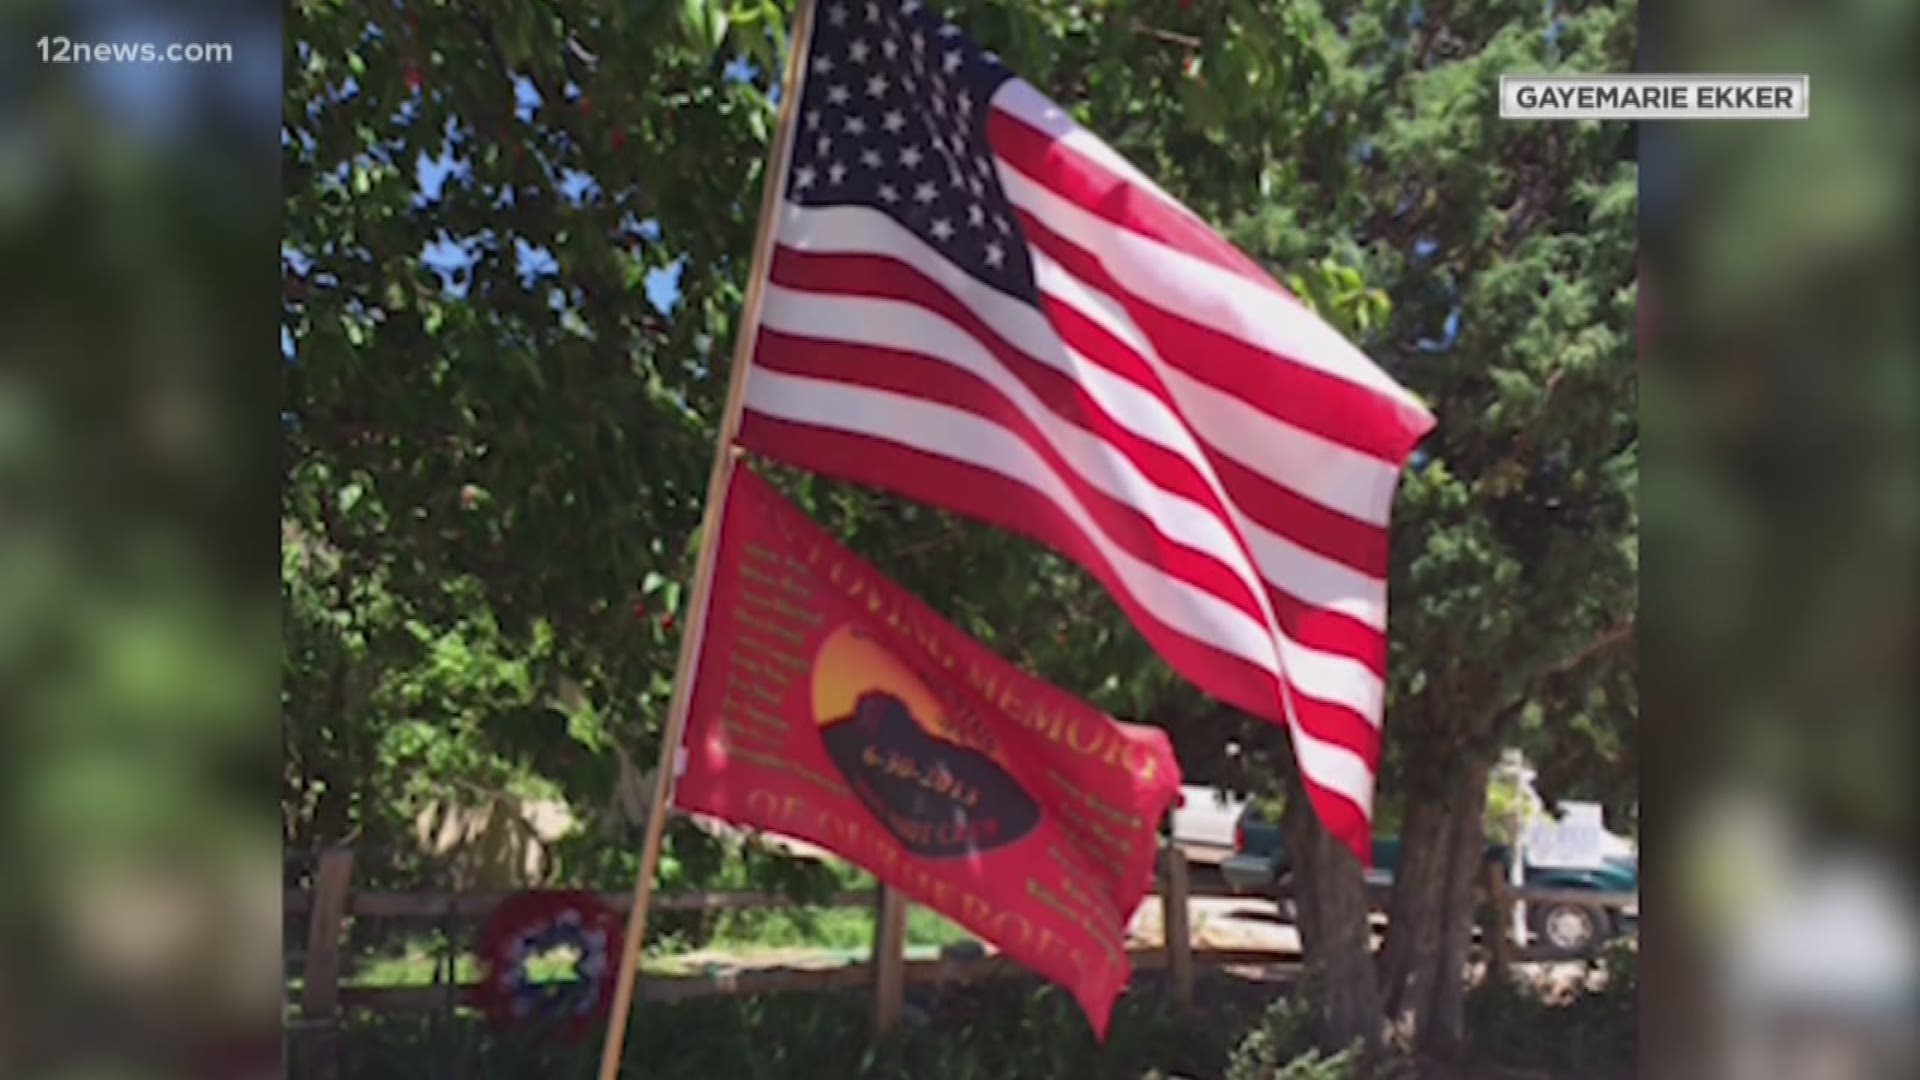 Joe Thurston was part of the Granite Mountain Hotshot crew trying to protect the community of Yarnell, Arizona when he and 18 others lost their lives in the fire. Families of the hotshots received special flags and the one that went to Thurston's mom has gone missing.